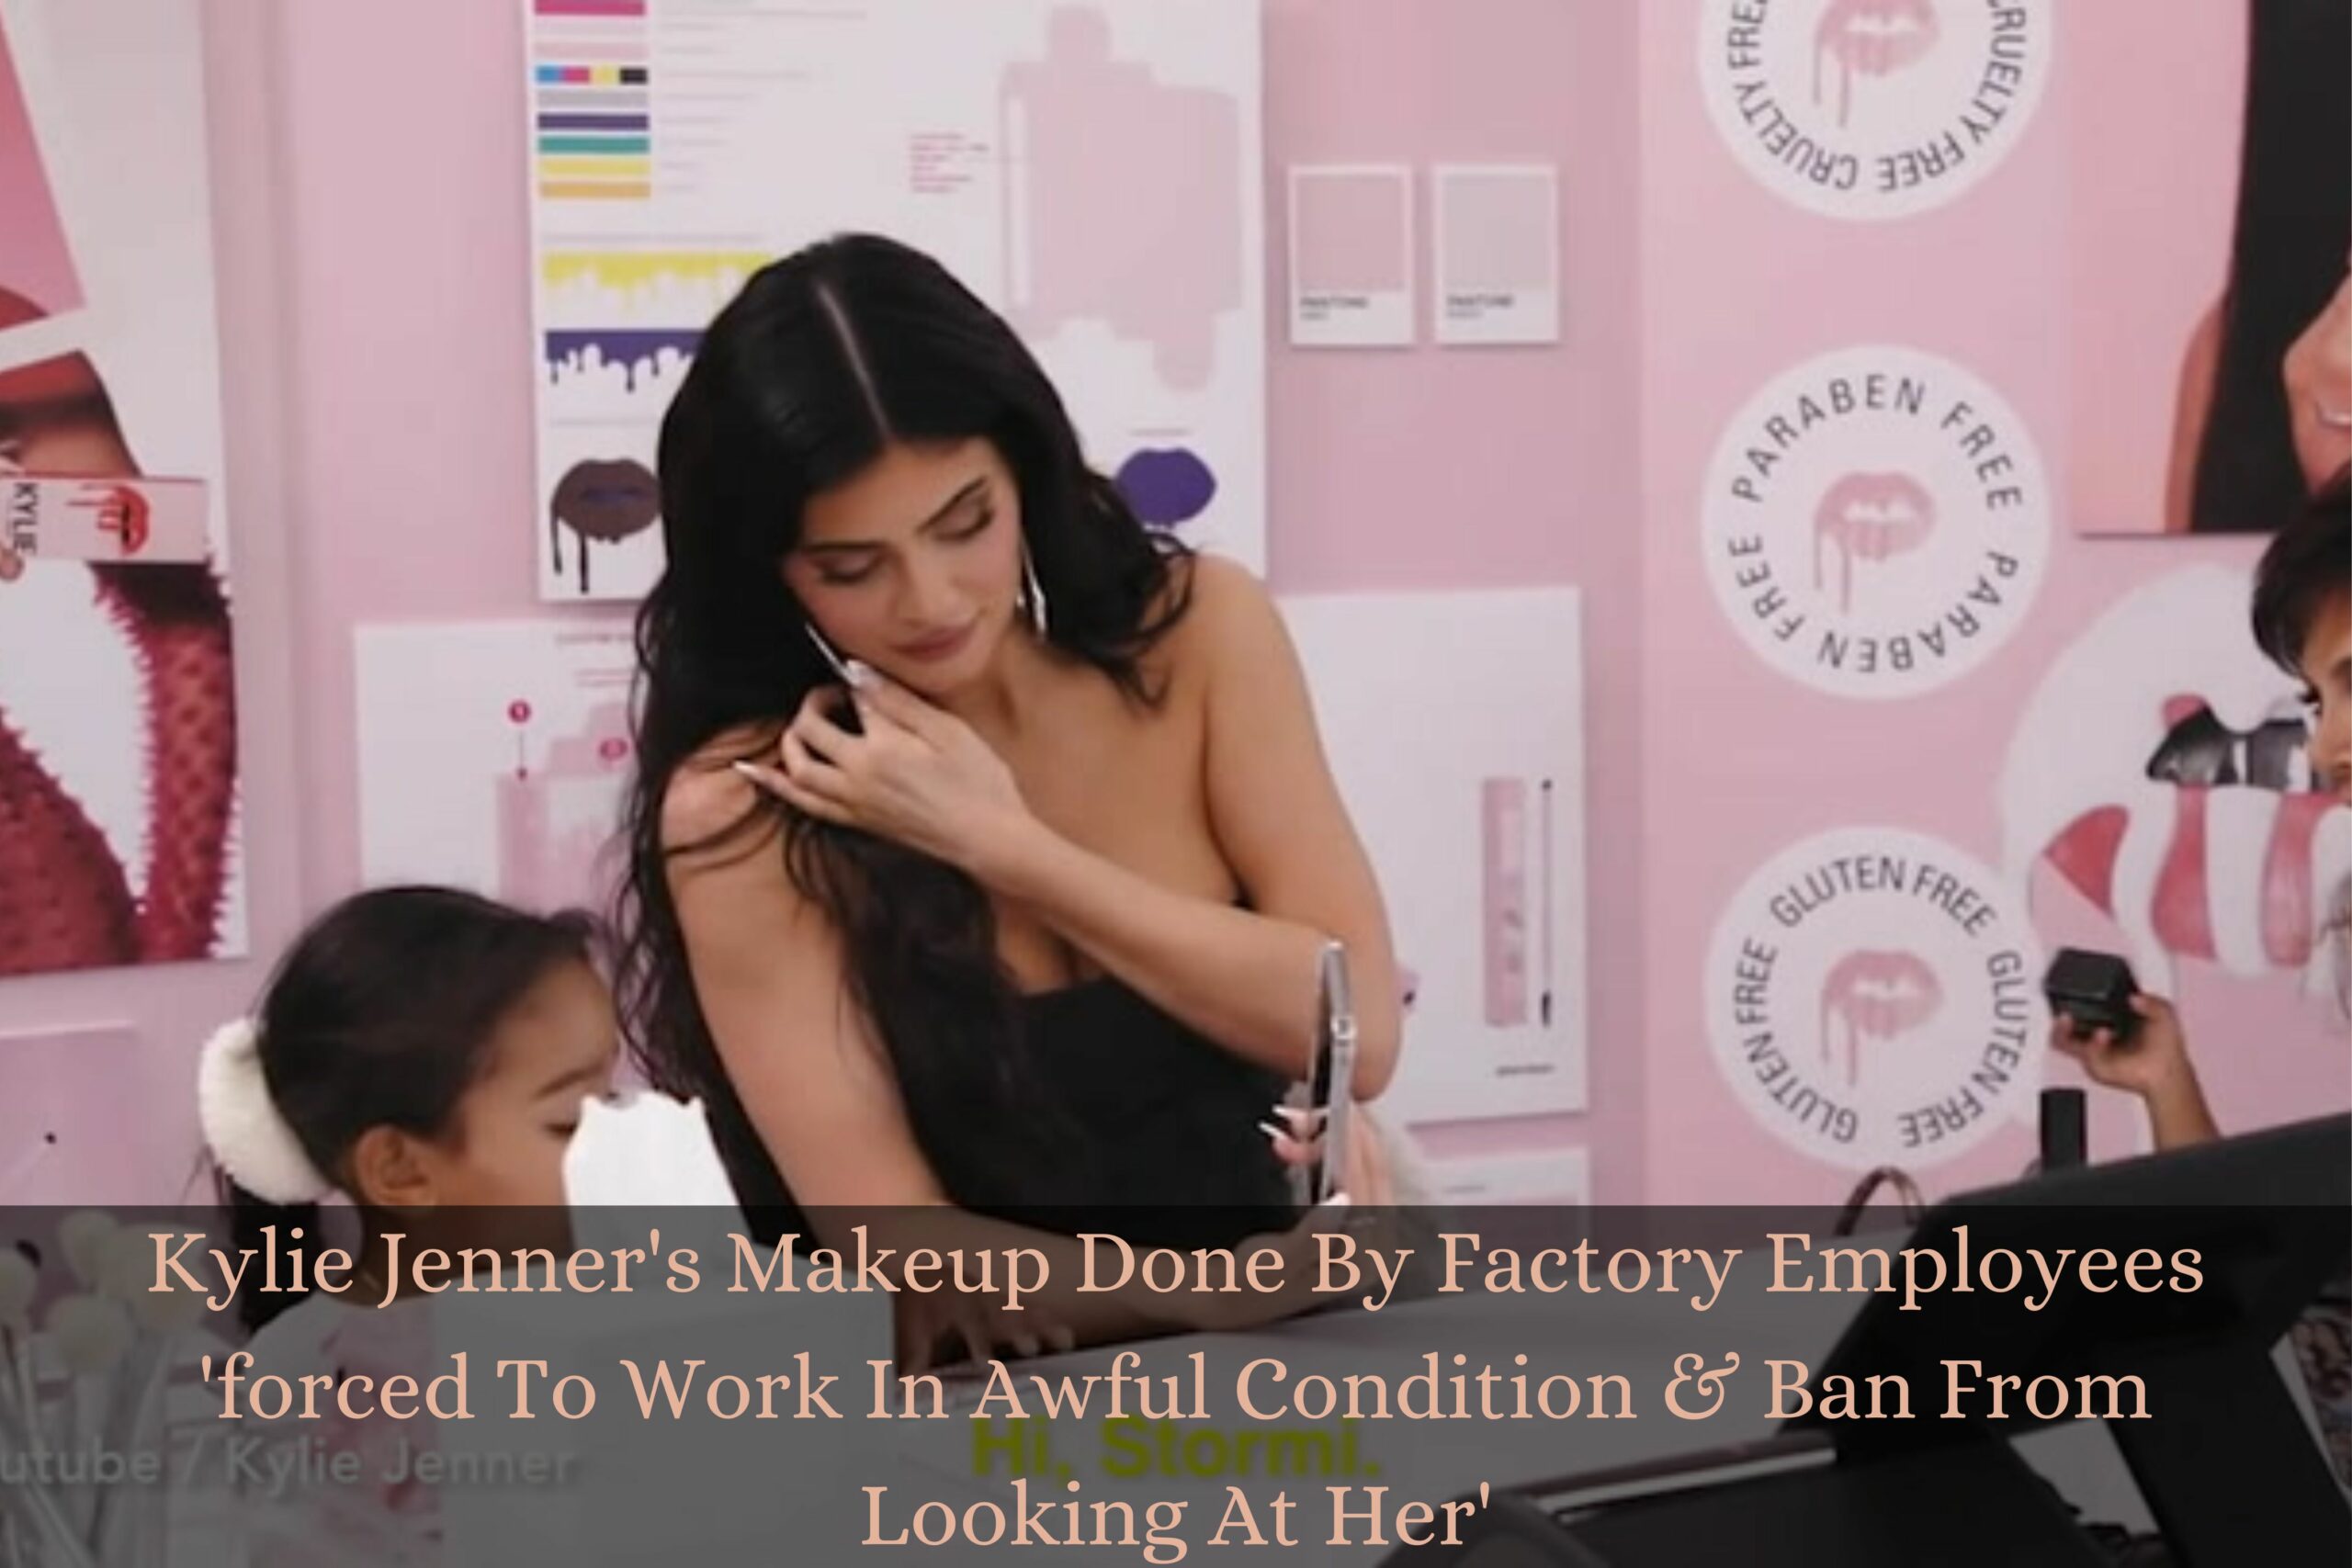 Kylie Jenner's Makeup Done By Factory Employees 'forced To Work In Awful Condition & Ban From Looking At Her'